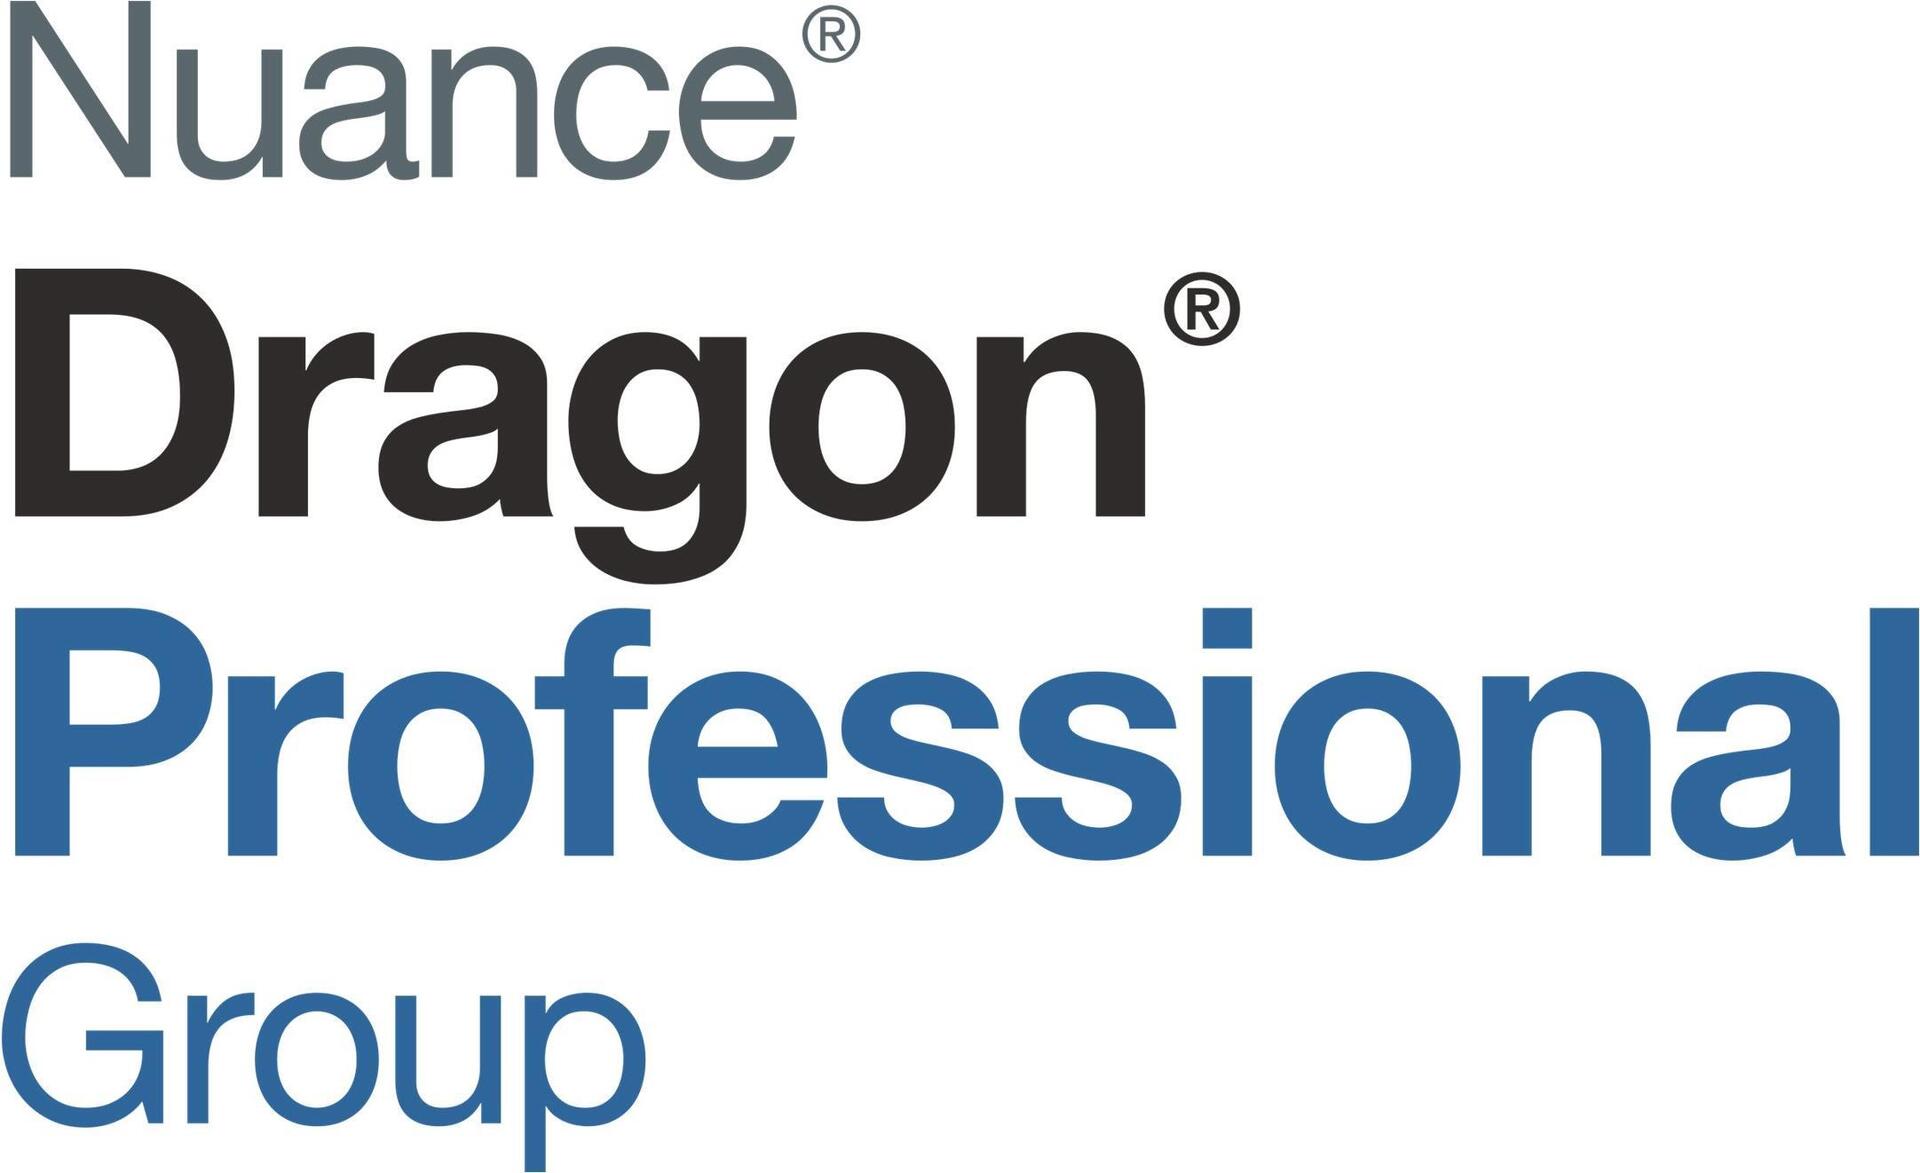 Nuance Dragon Professional Group (LIC-A209X-T01-16.0-A)